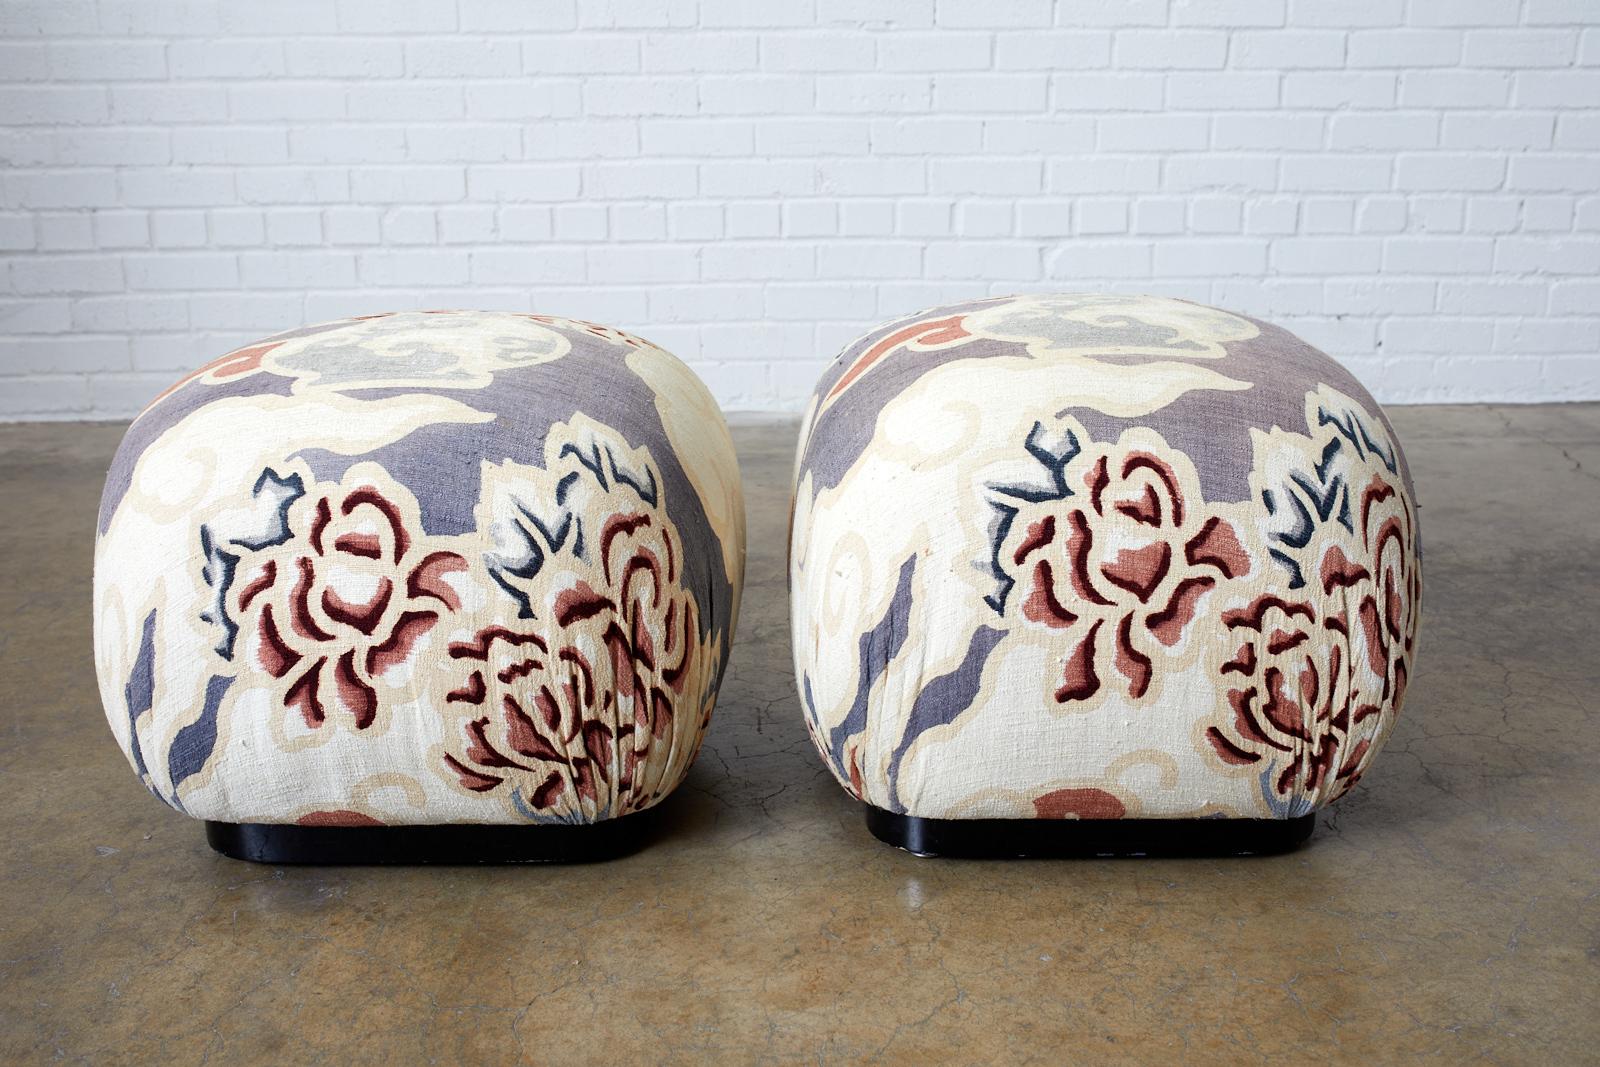 Bespoke pair of cube square shaped ottomans or poufs featuring a modern print linen upholstery. Each ottoman is mounted on a square wooden base with an ebonized lacquer finish. Constructed in Los Angeles for a CA designer with label still attached